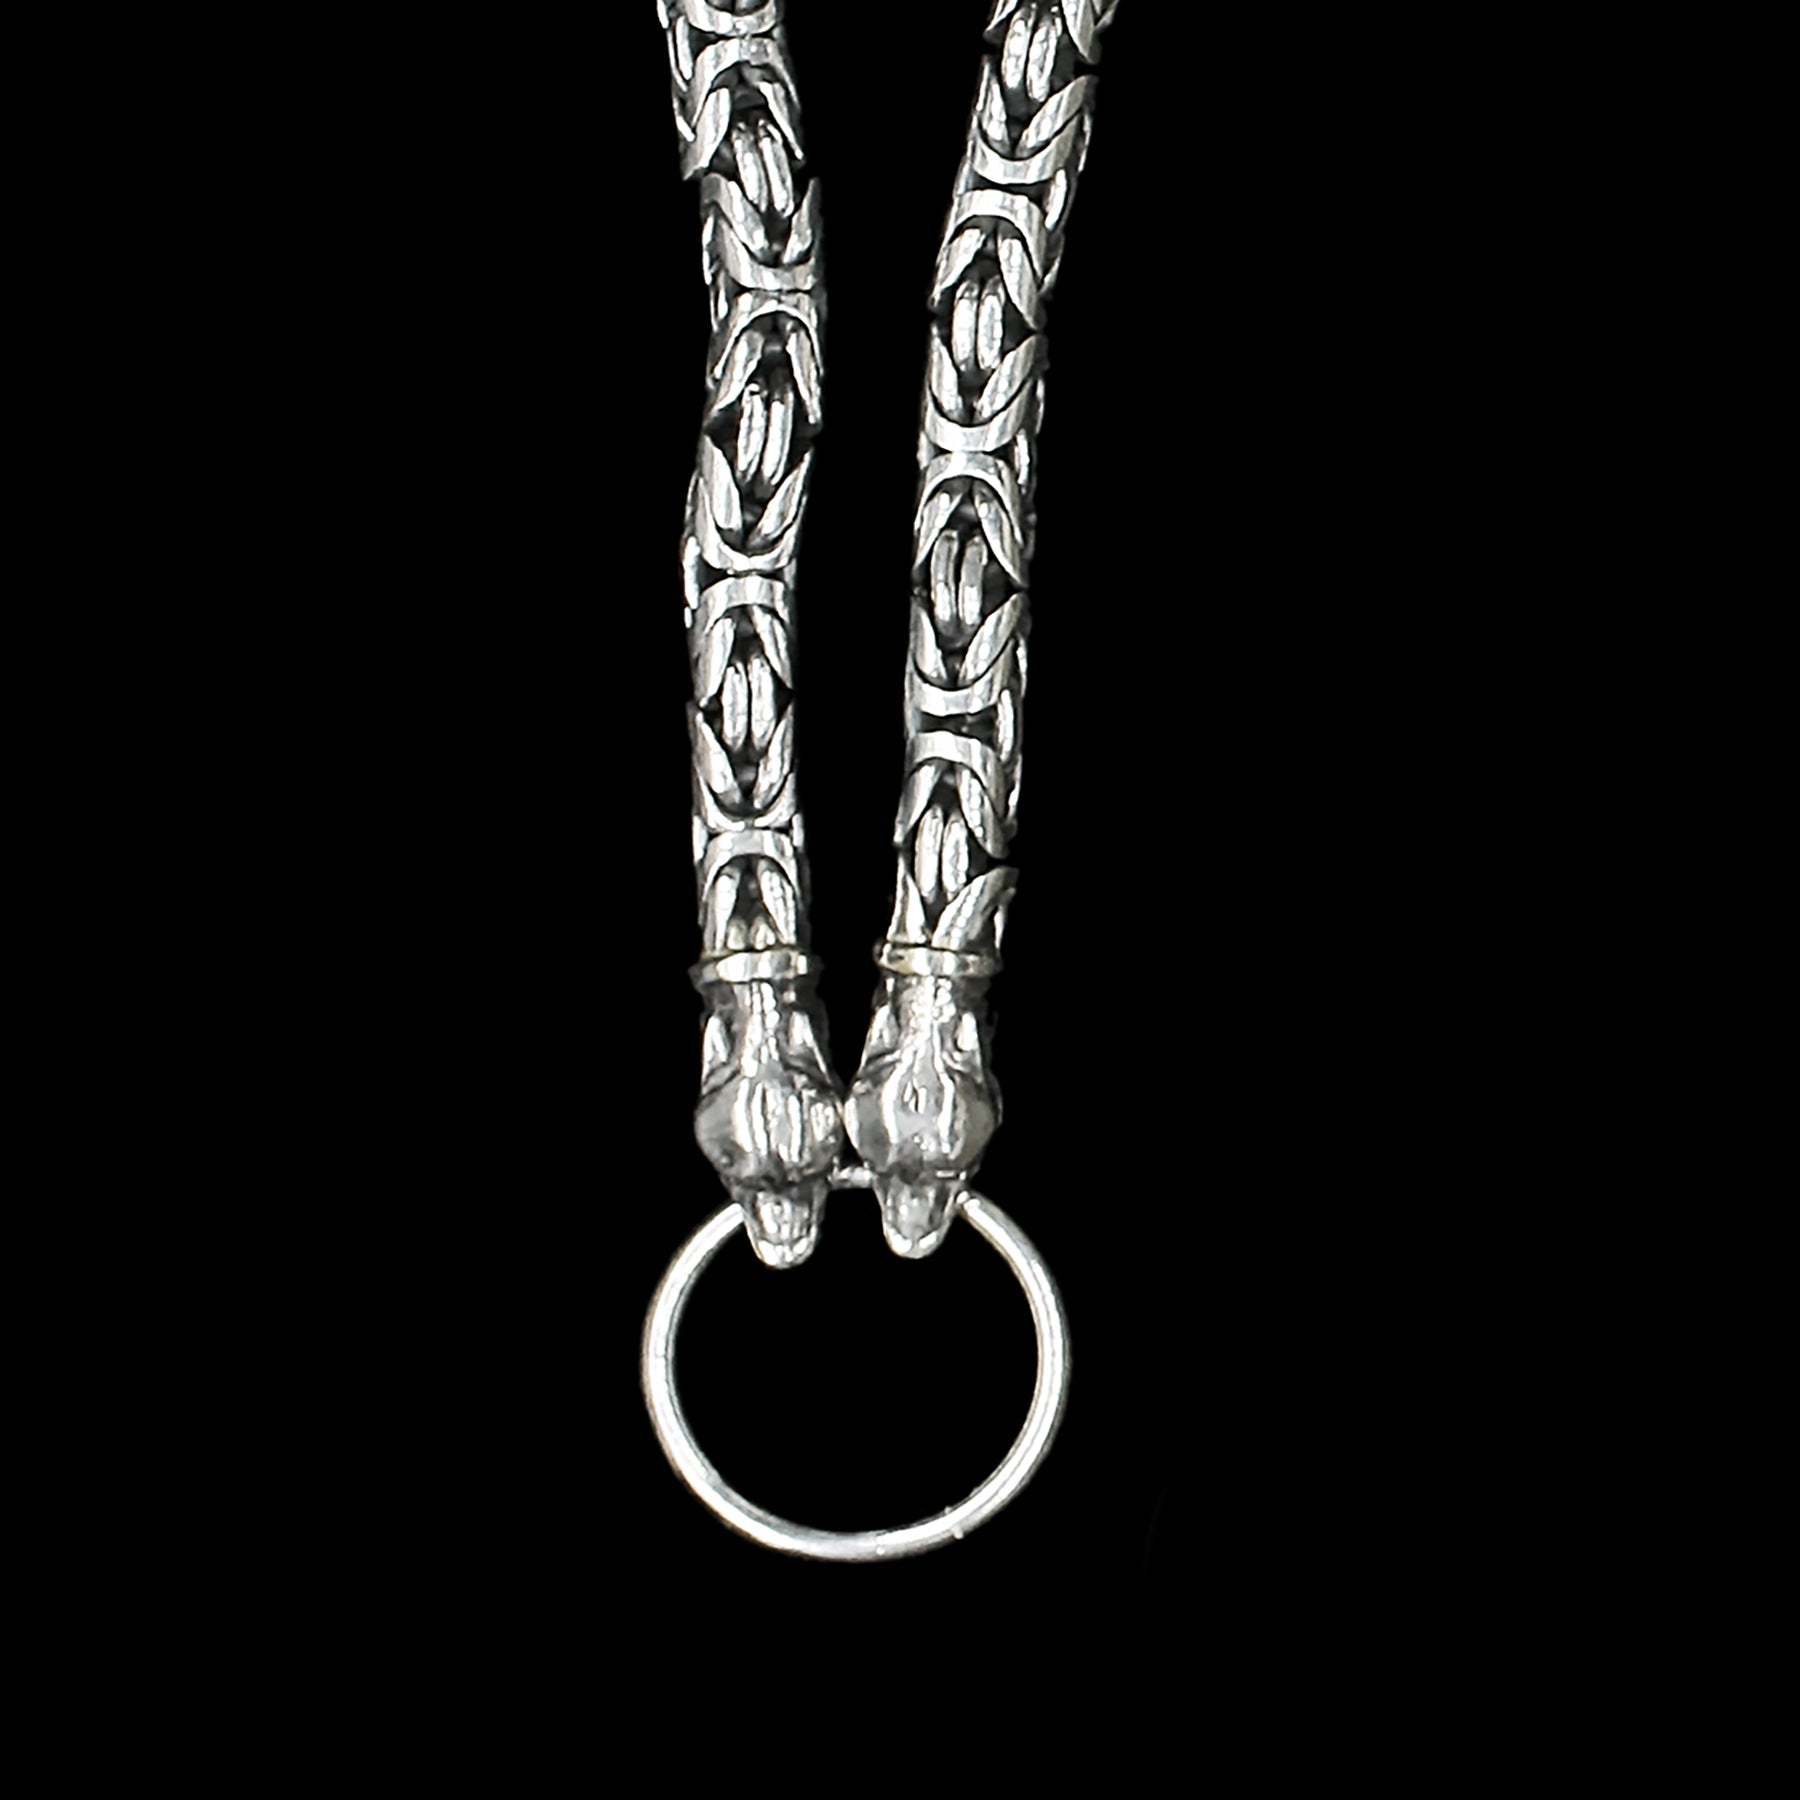 8Mm Thick Silver King Chain Thors Hammer Necklace - Ferocious Wolf Heads No Pendant Viking Necklaces